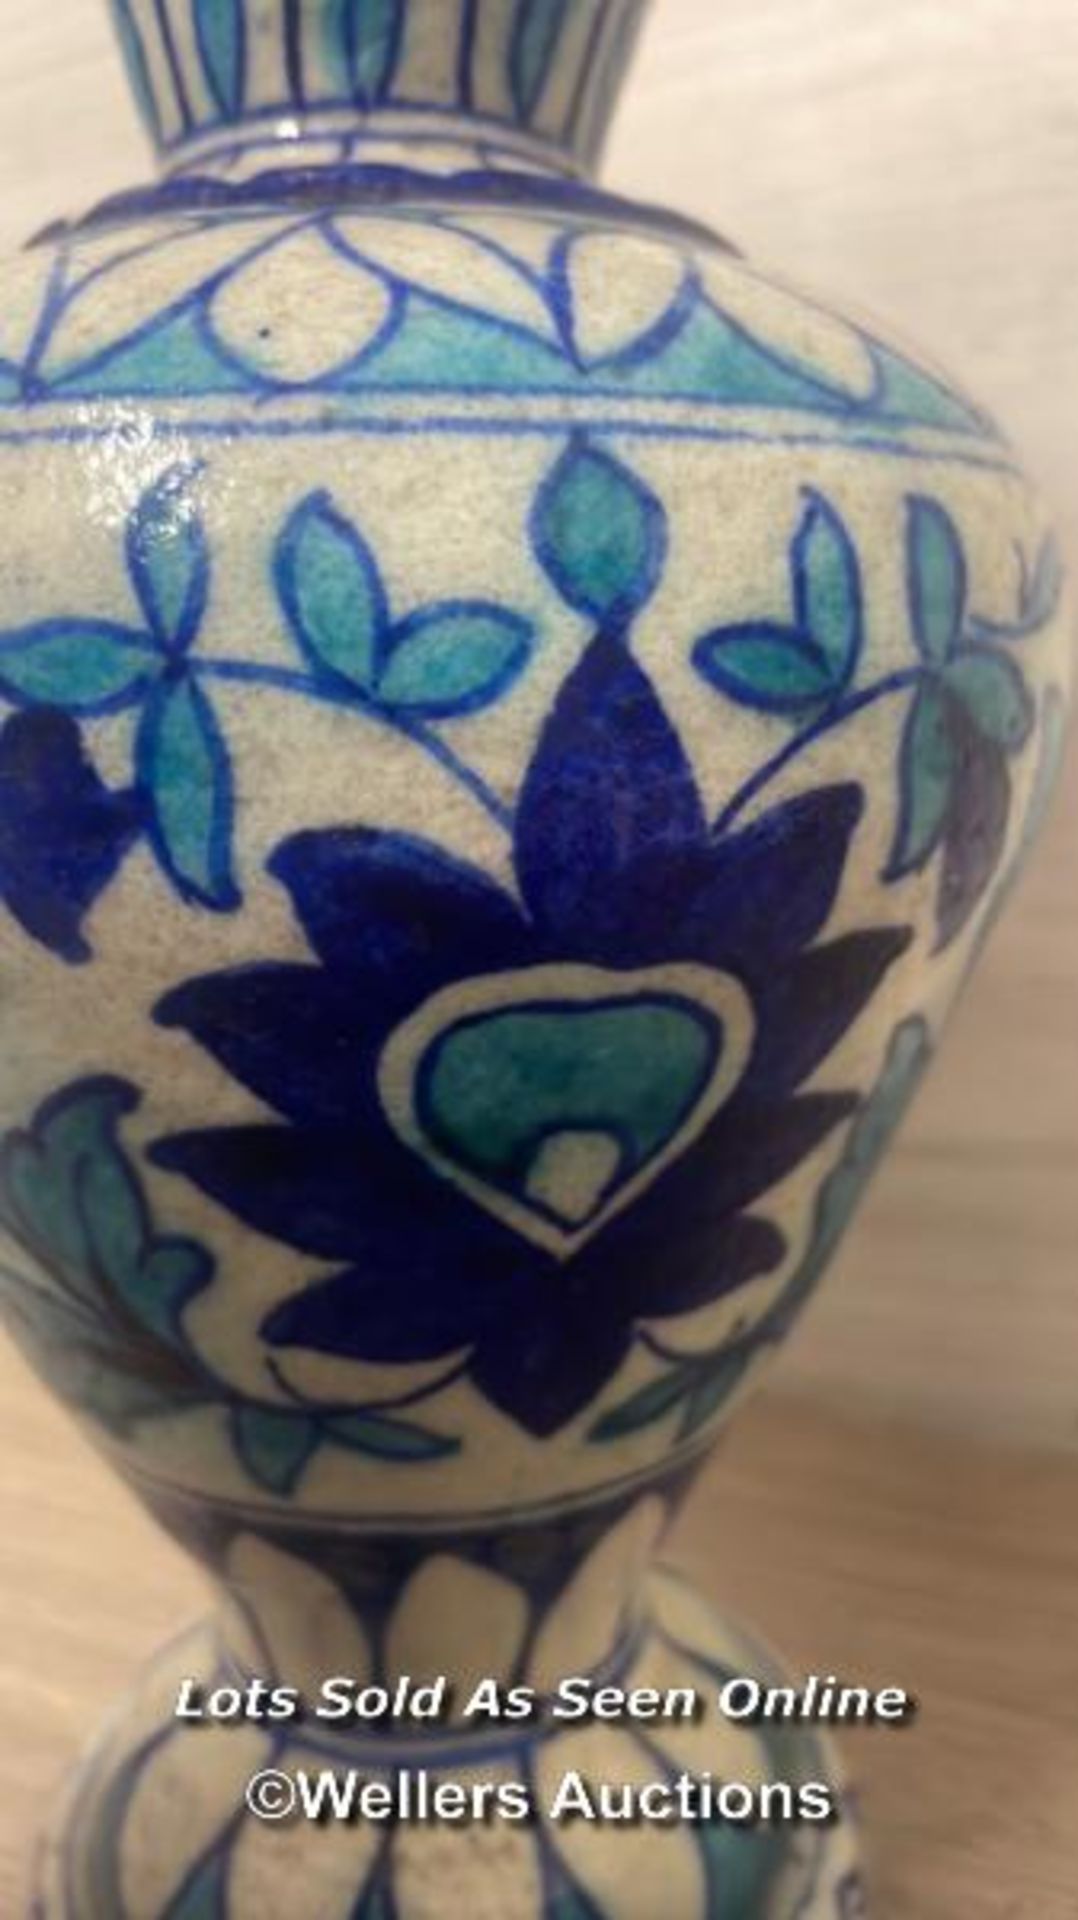 TWO SIMILAR MULTAN POTTERY VASES FROM PAKISTAN, HAND PAINTED BLUE & TURQUOISE FOLIAGE AND FLOWER - Image 11 of 15